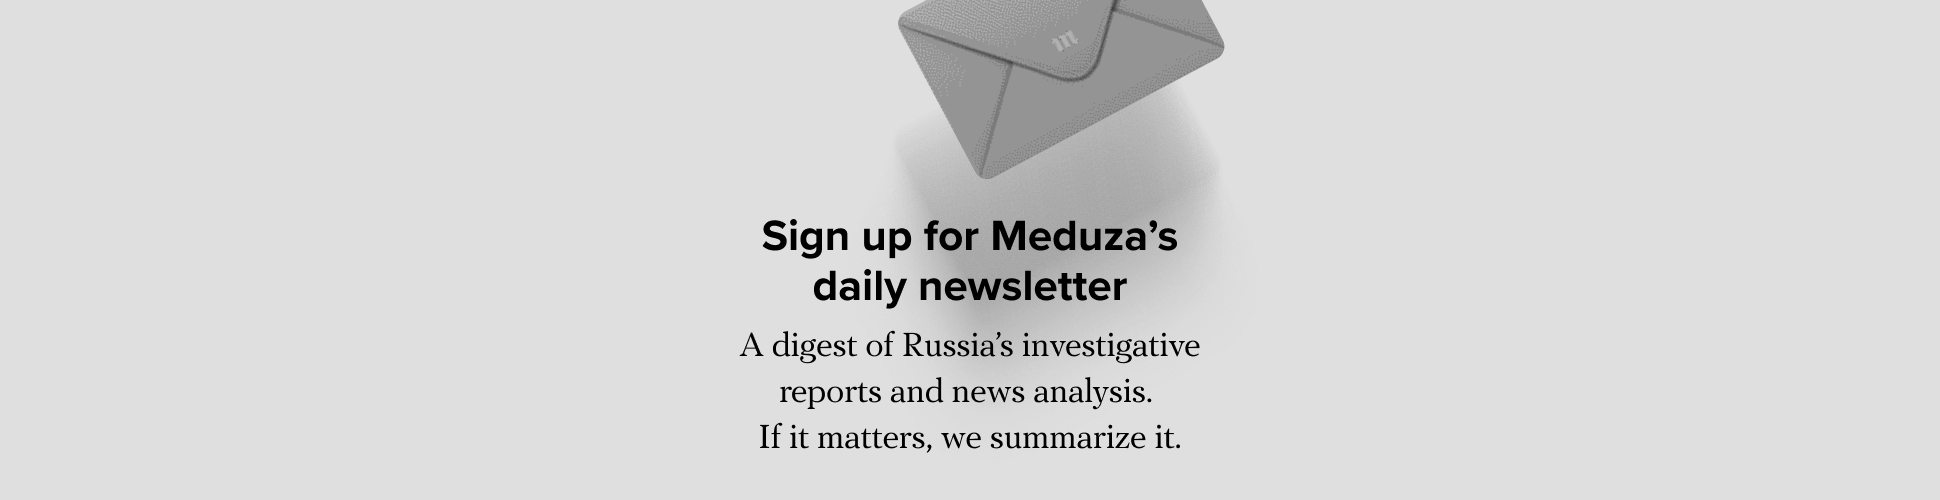 Sign up for Meduza’s daily newsletter